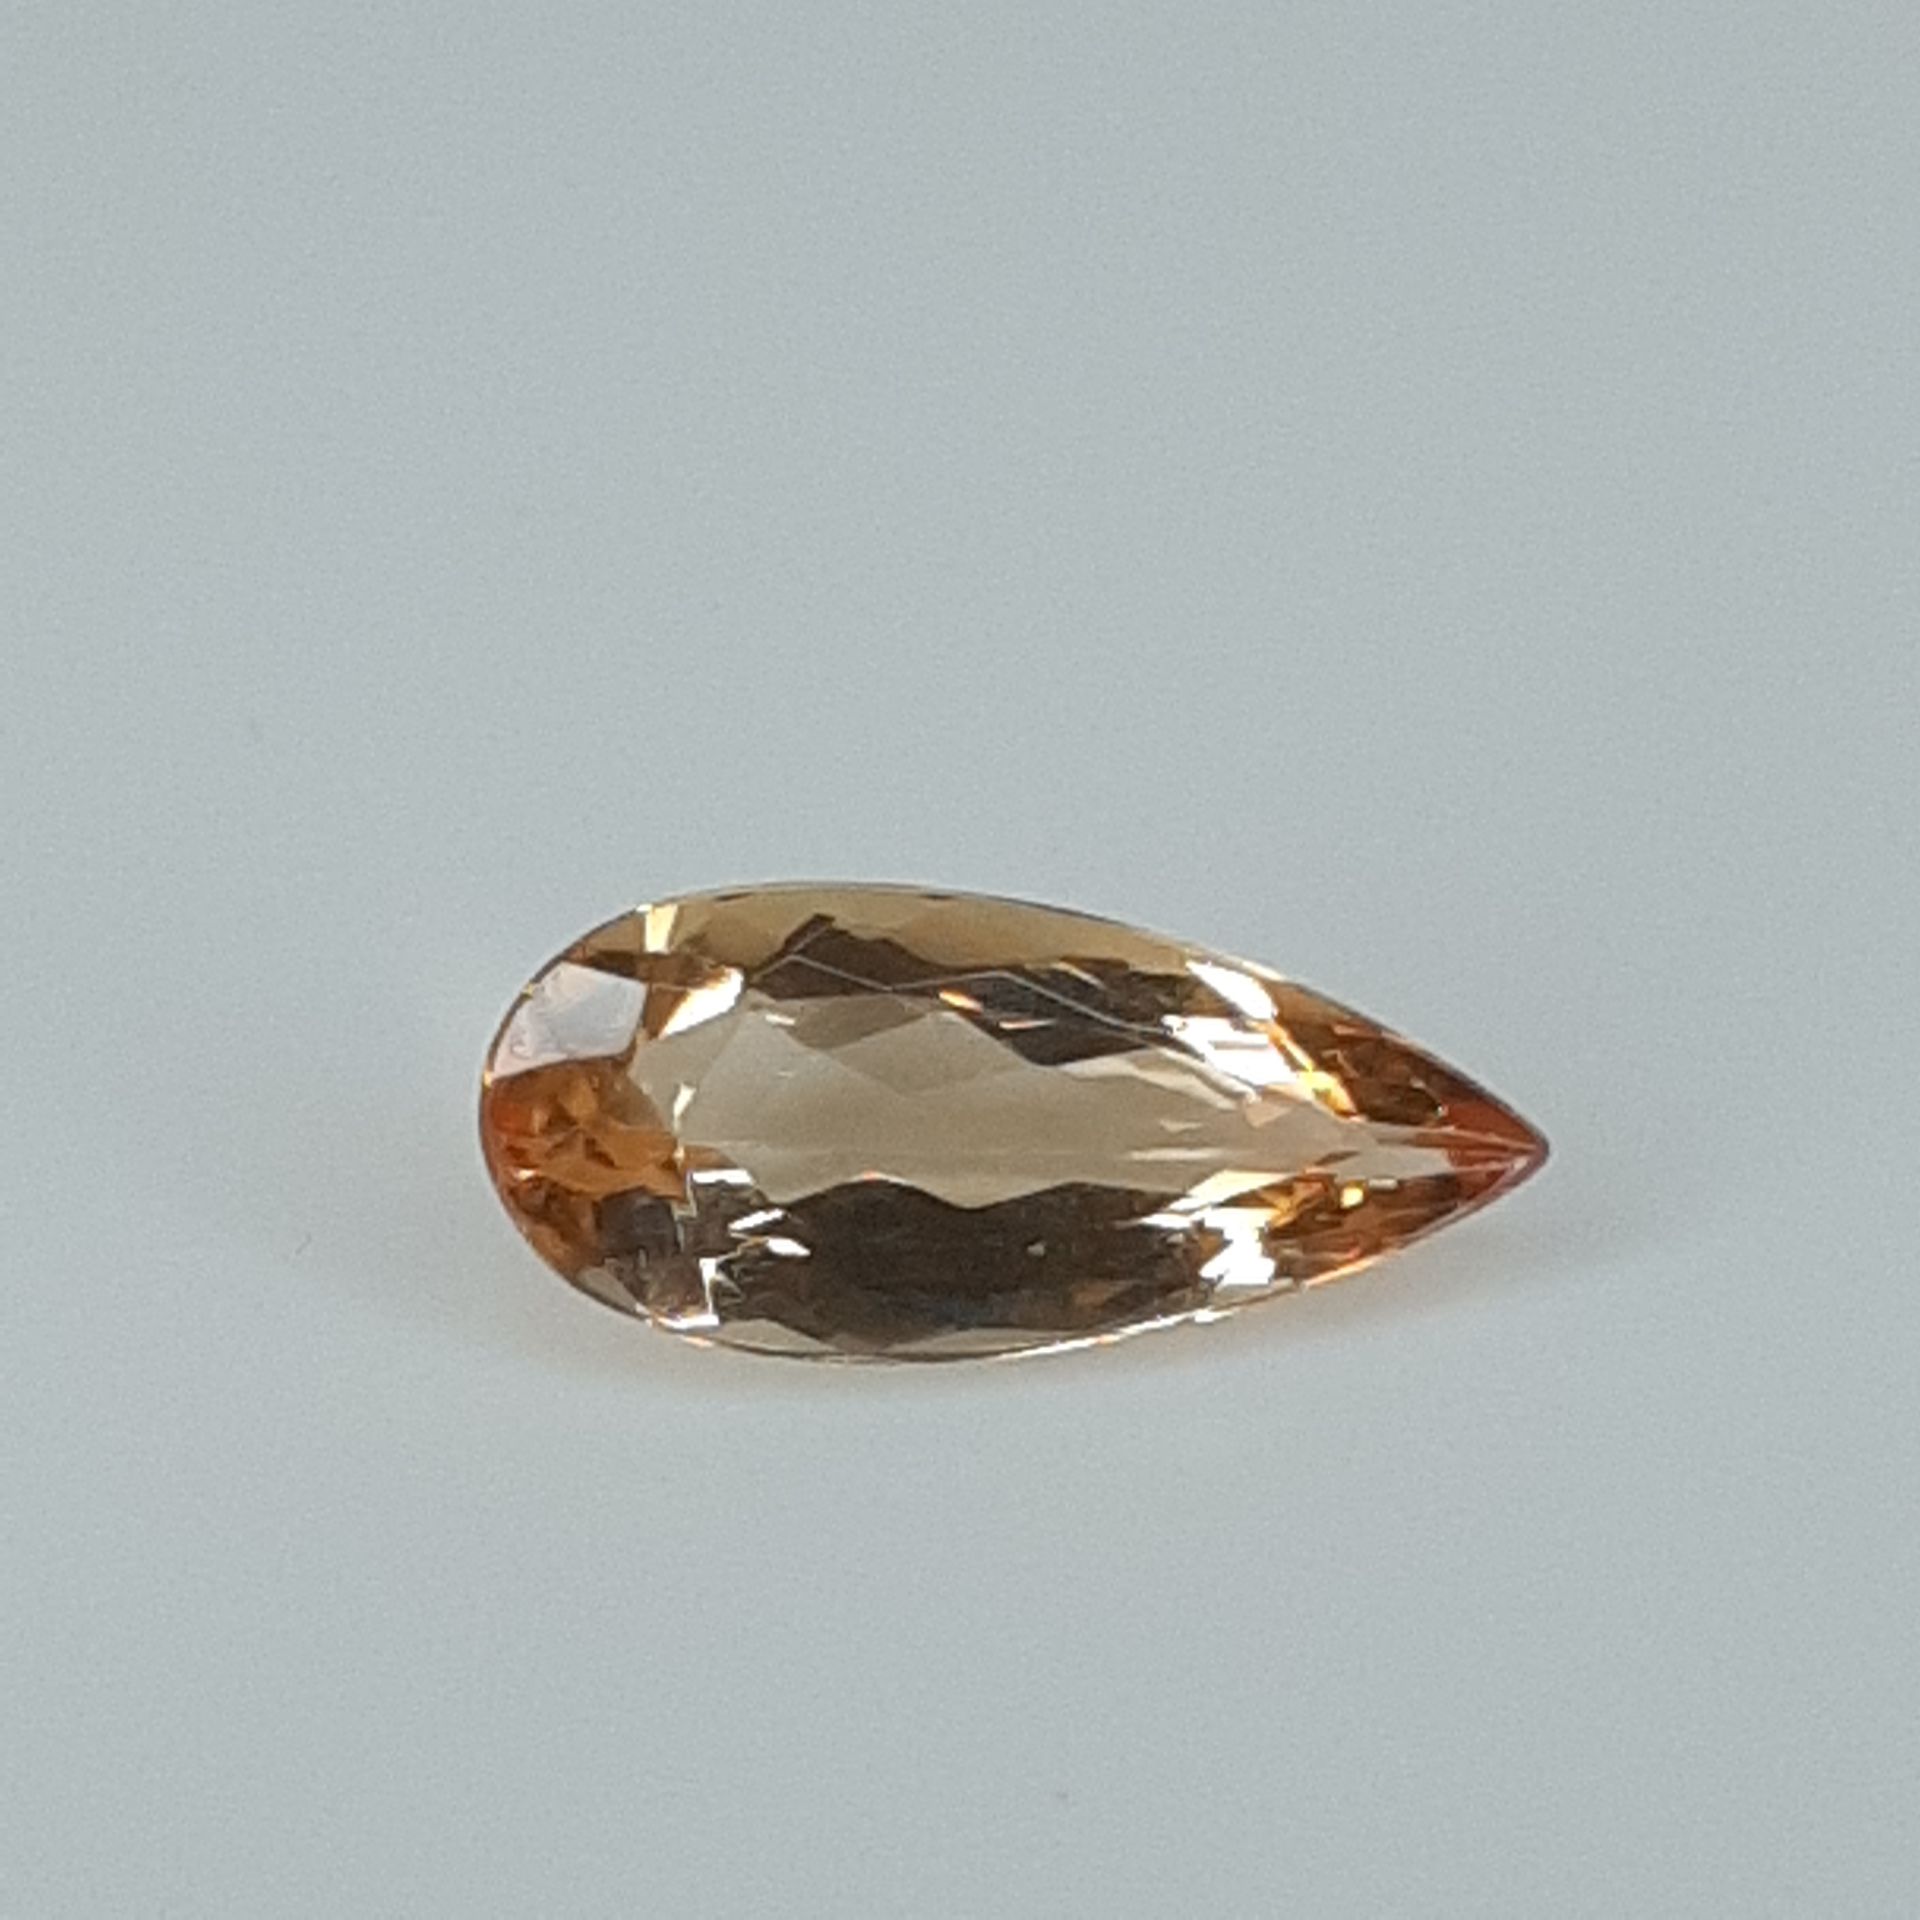 Topaze impériale - BRESIL - 2.30 cts IMPERIAL TOPAZE - From Brazil Ouro Preto - &hellip;